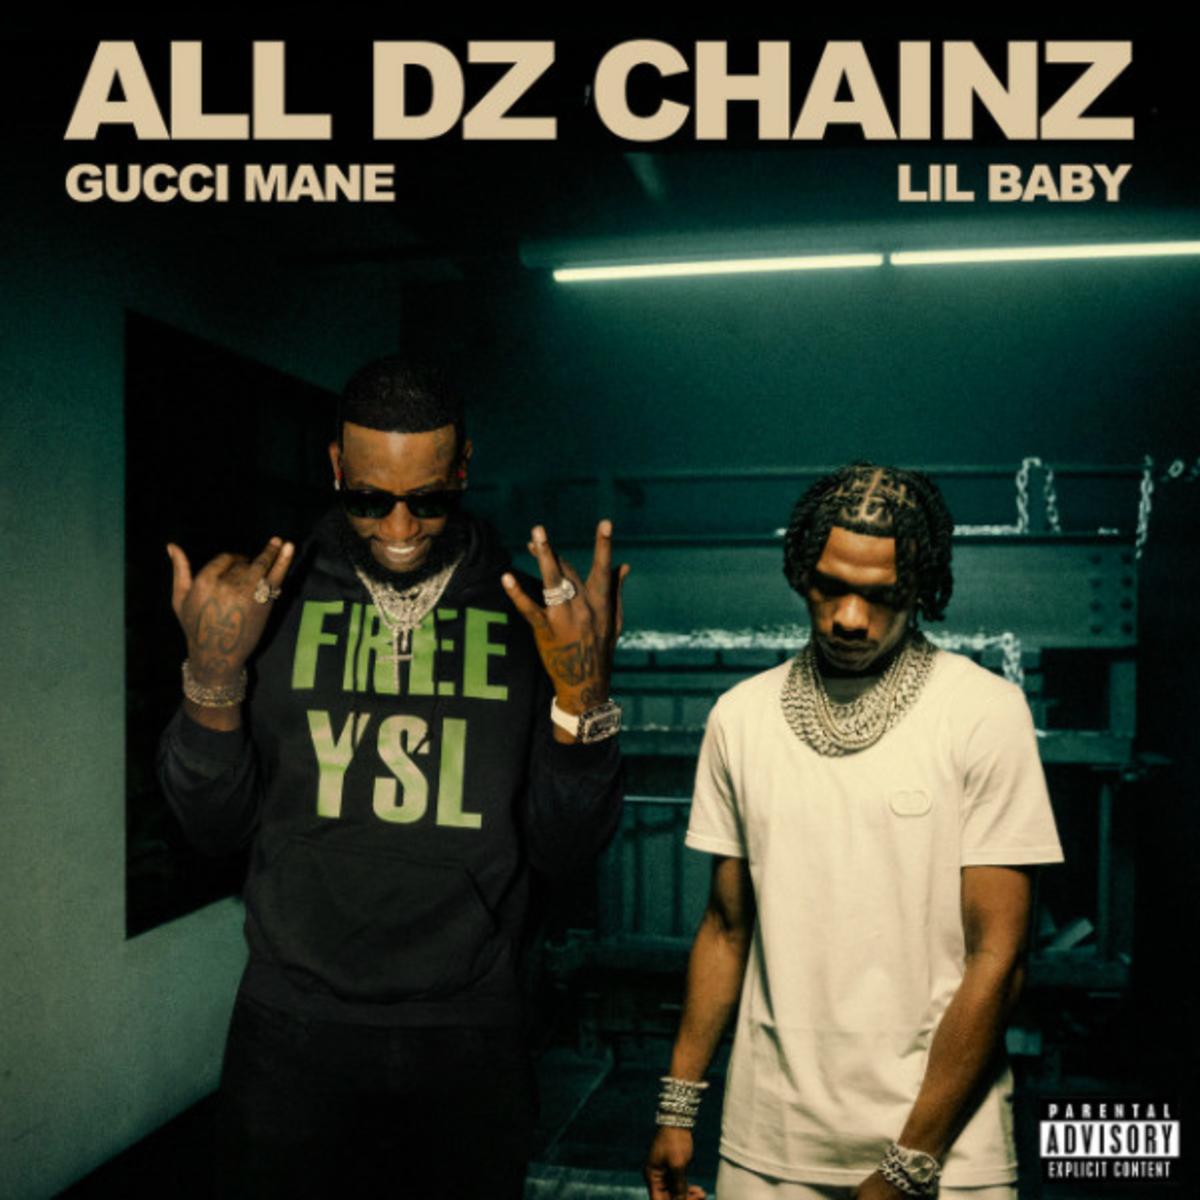 Gucci Mane & Lil Baby Pay Homage To YSL In “All Dz Chainz”